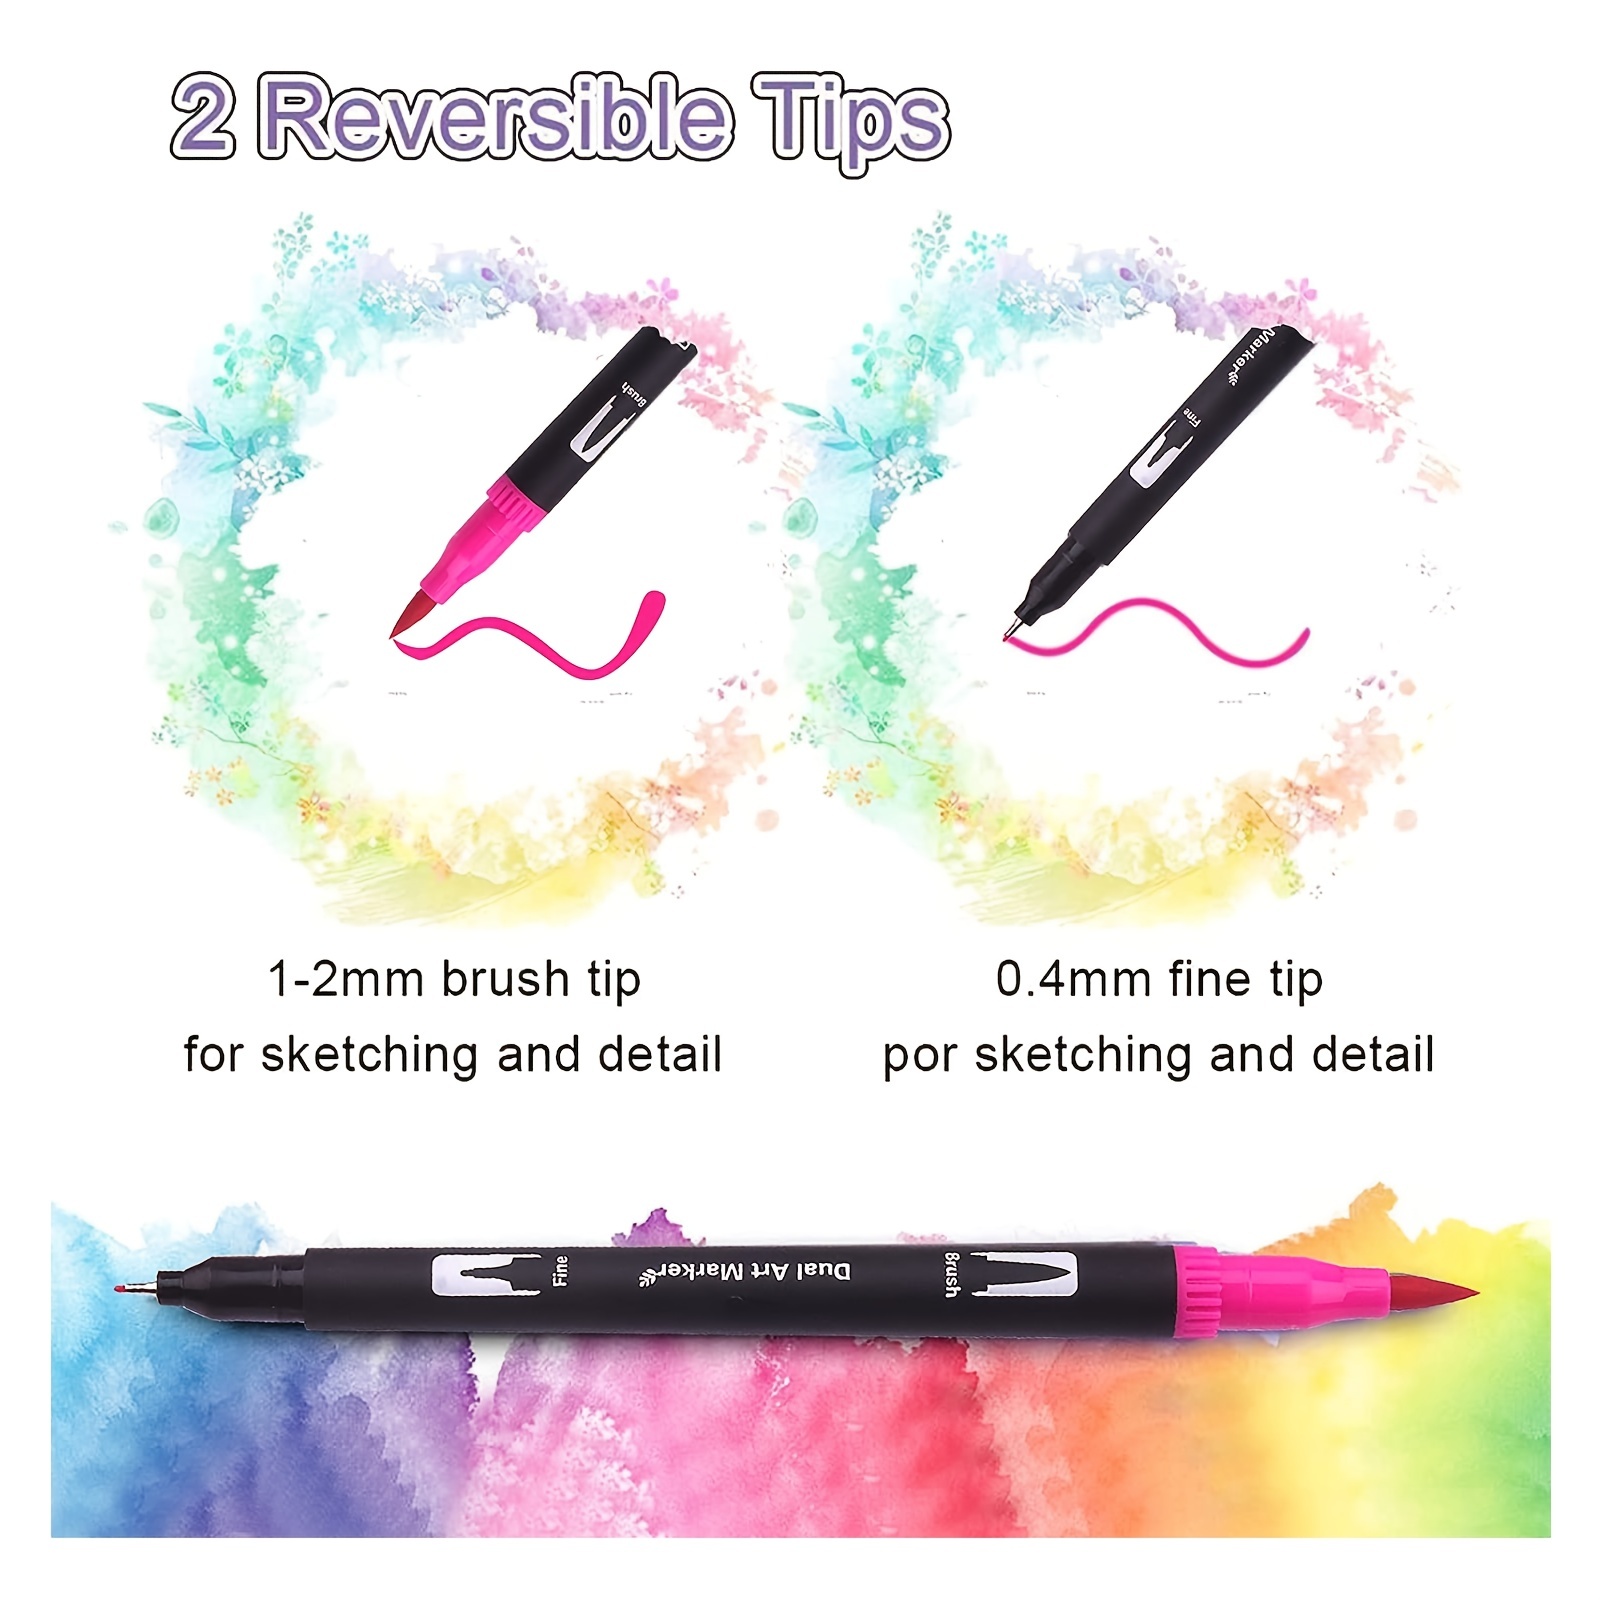 Soft Dual Brush Art Markers Pen Fine Tip and Brush Tip Great for Bullet  Journal Student Coloring Book Calligraphy Lettering